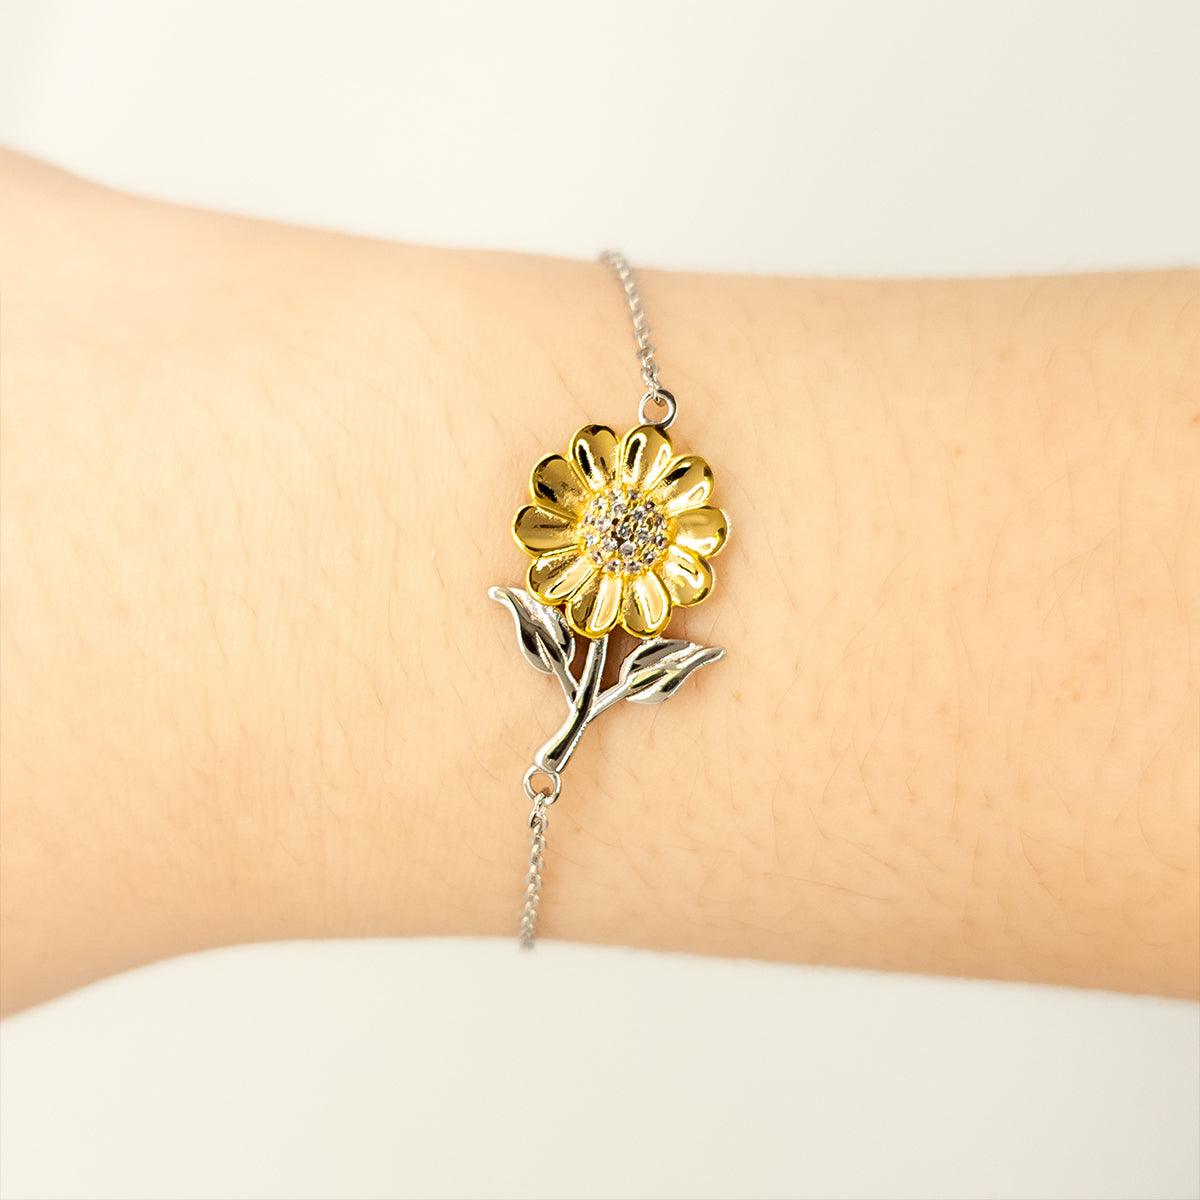 Sarcastic Anesthesiologist Sunflower Bracelet Gifts, Christmas Holiday Gifts for Anesthesiologist Birthday Message Card, Anesthesiologist: Because greatness is woven into the fabric of every day, Coworkers, Friends - Mallard Moon Gift Shop